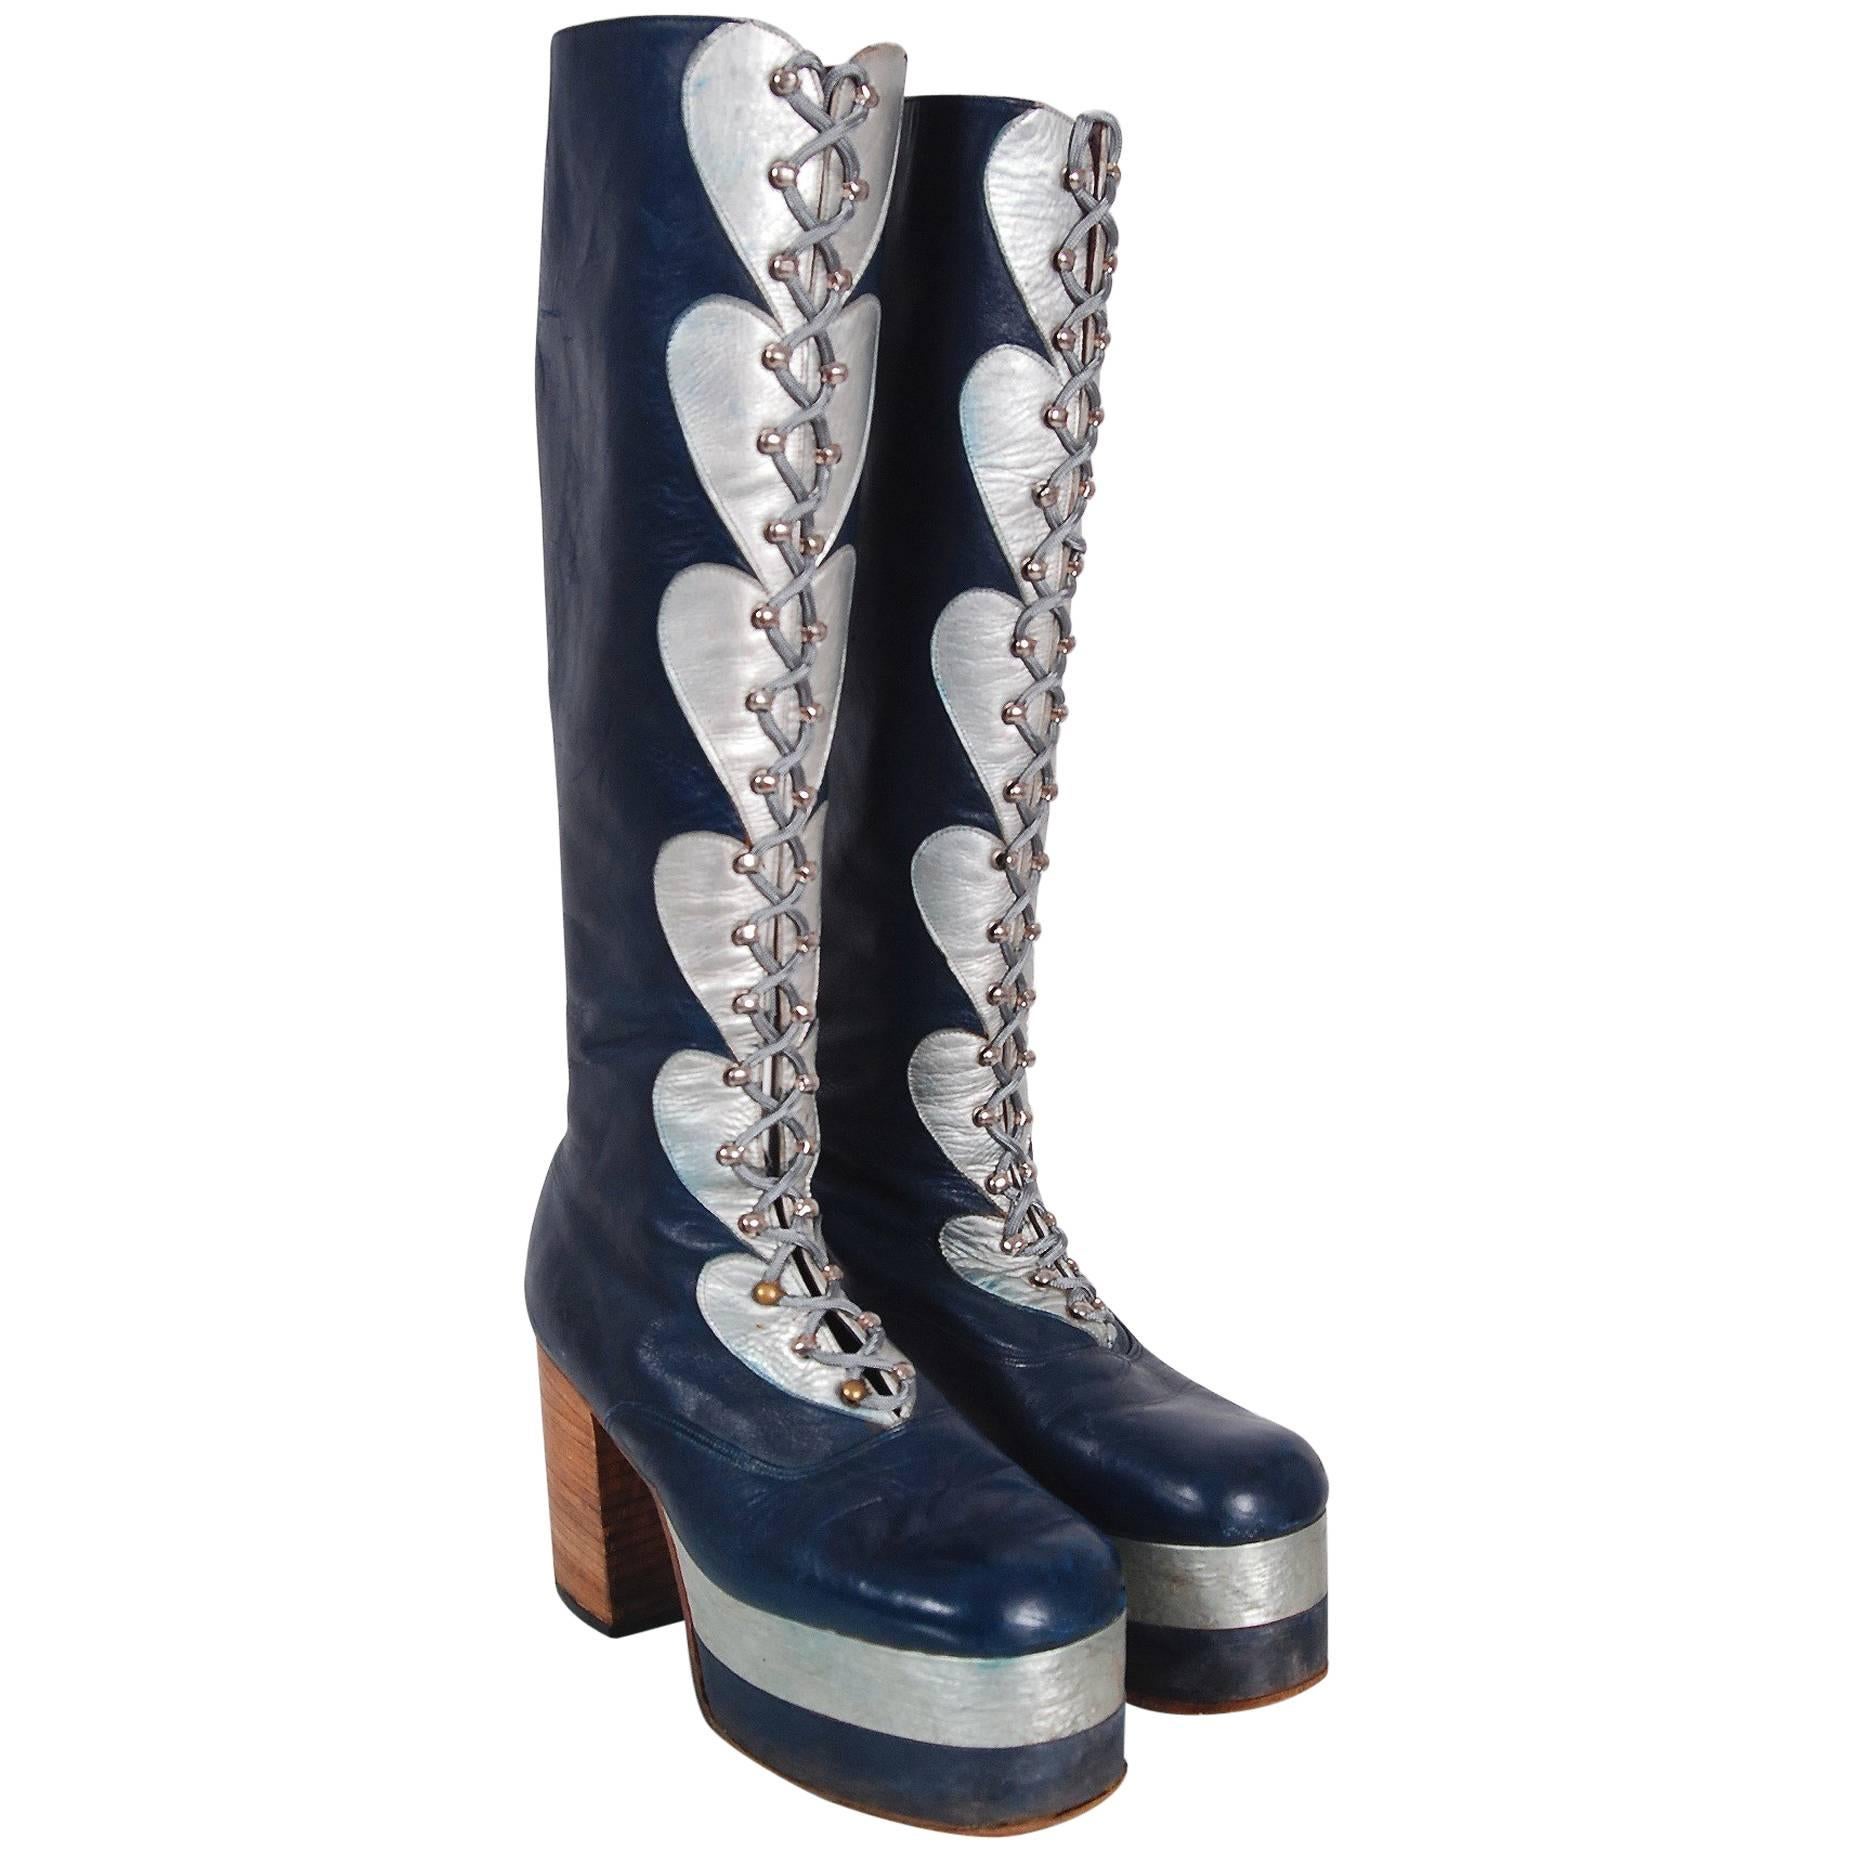 1970's Blue & Silver Leather Novelty Hearts Knee-High Platform Glam-Rock Boots